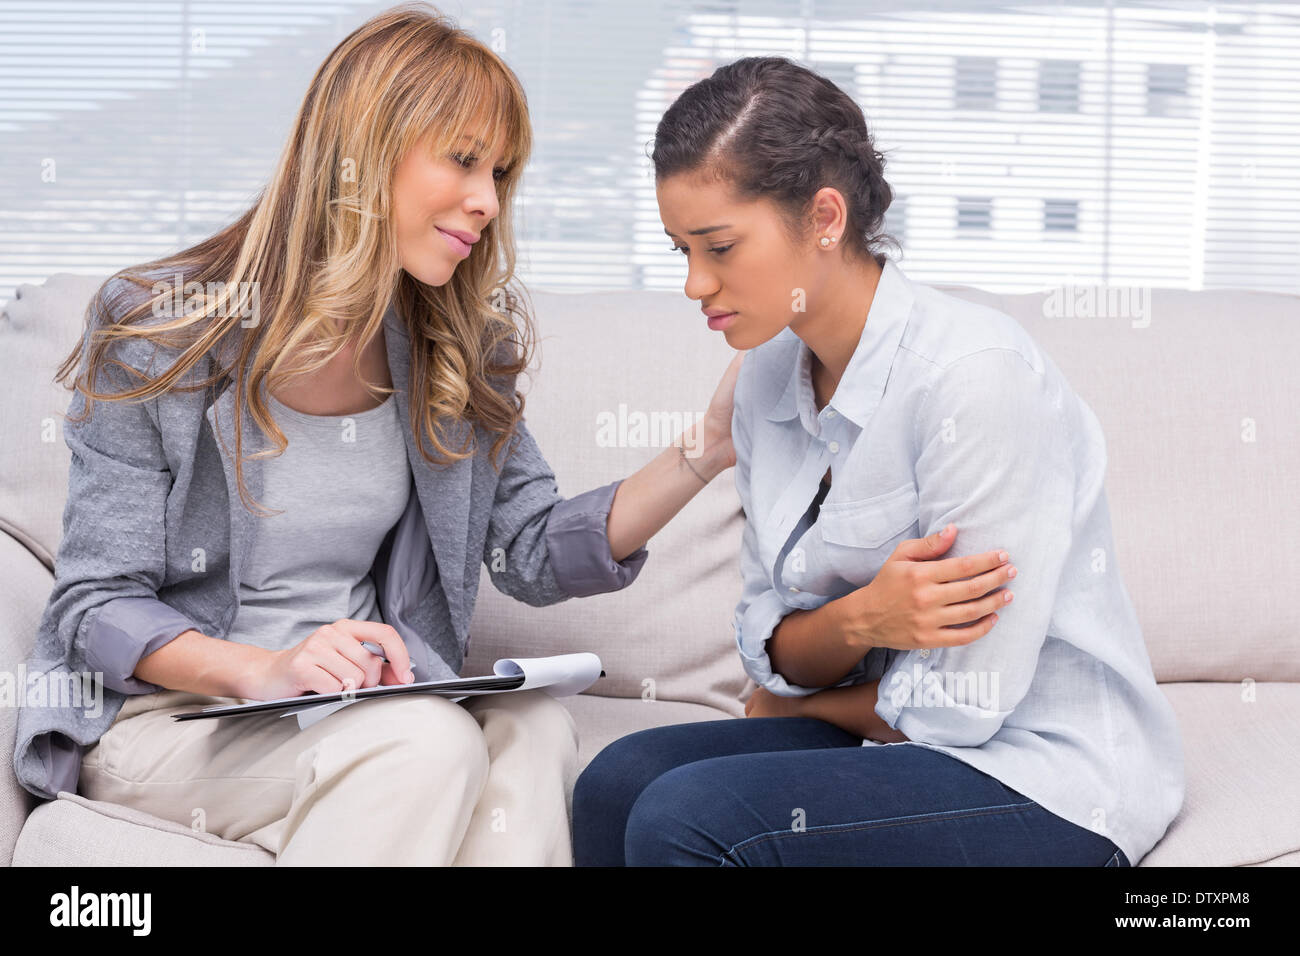 Psychotherapist helping a patient Stock Photo